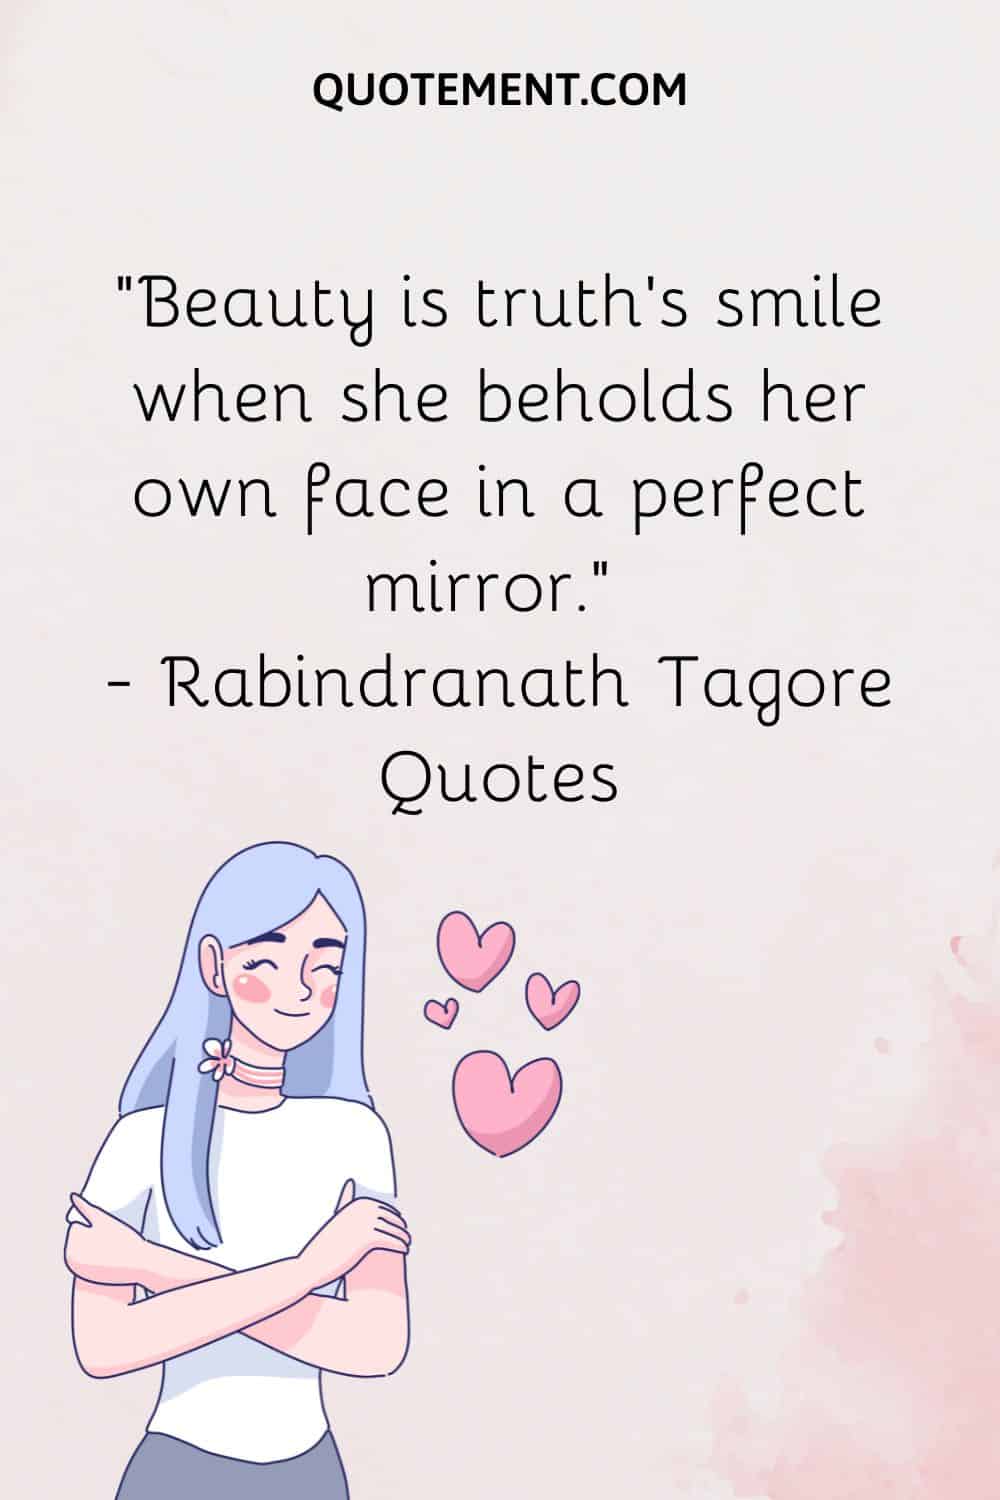 Beauty is truth's smile when she beholds her own face in a perfect mirror